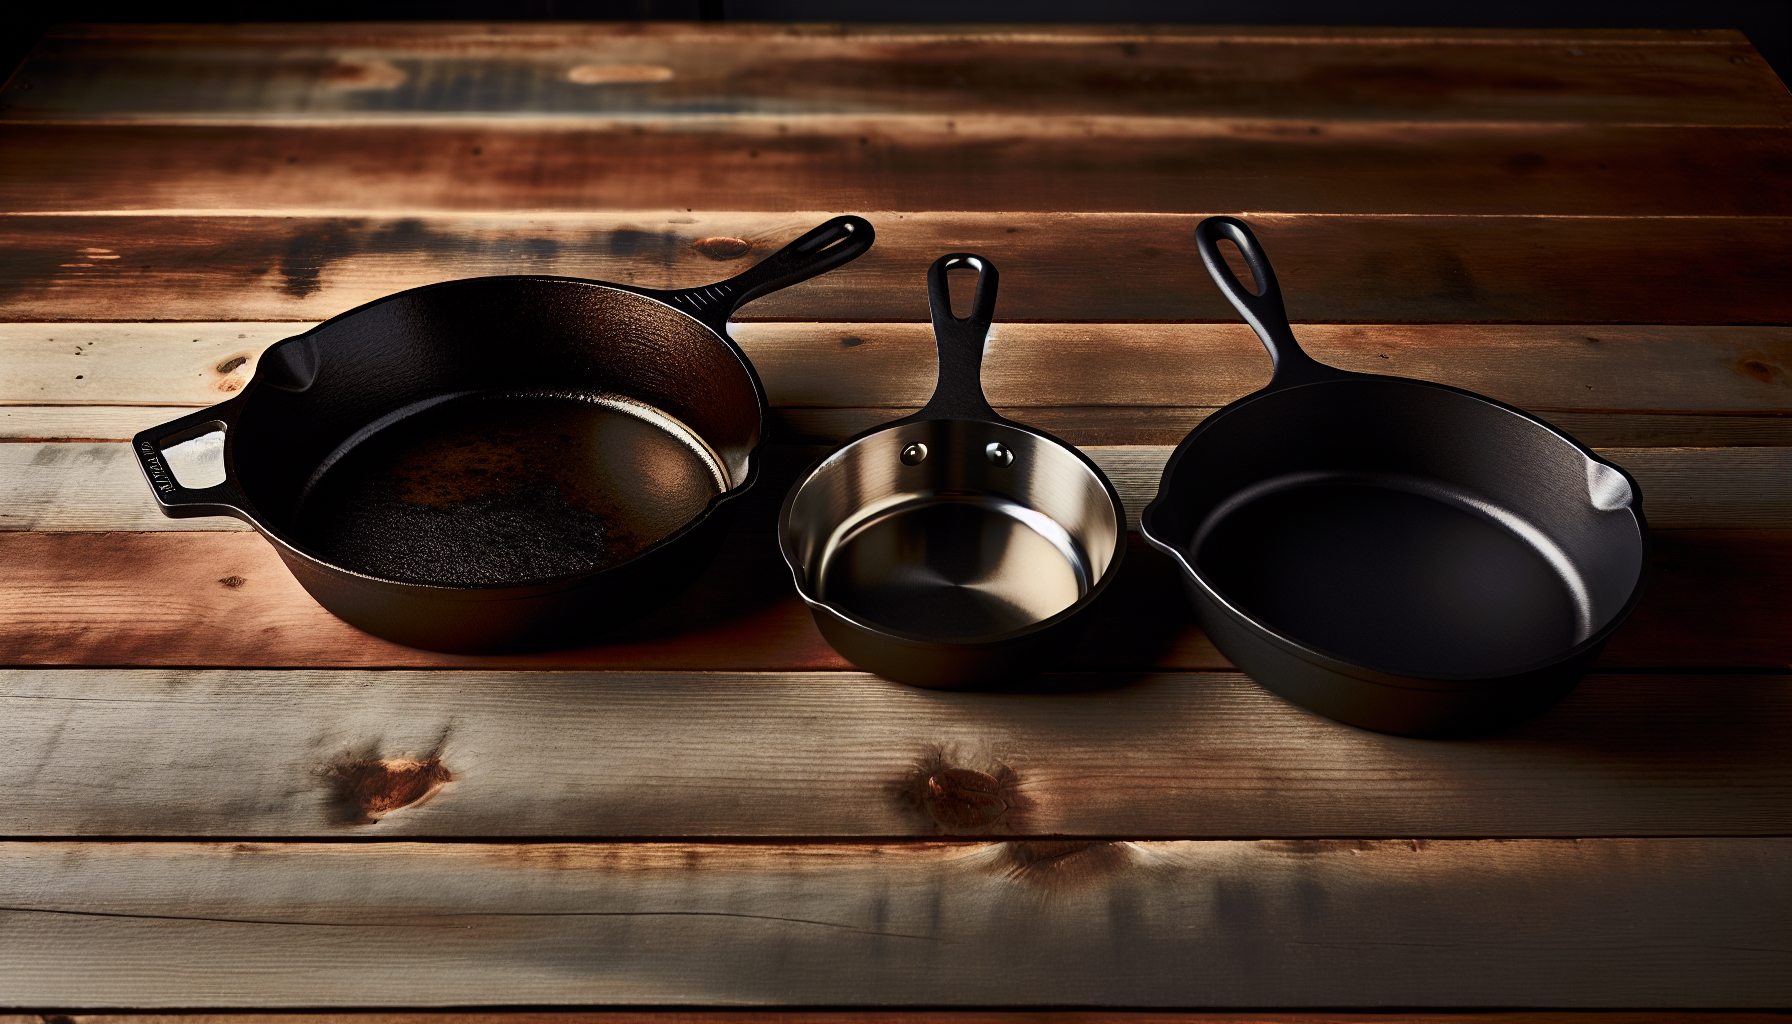 Comparison of cast iron, stainless steel, and nonstick deep skillets